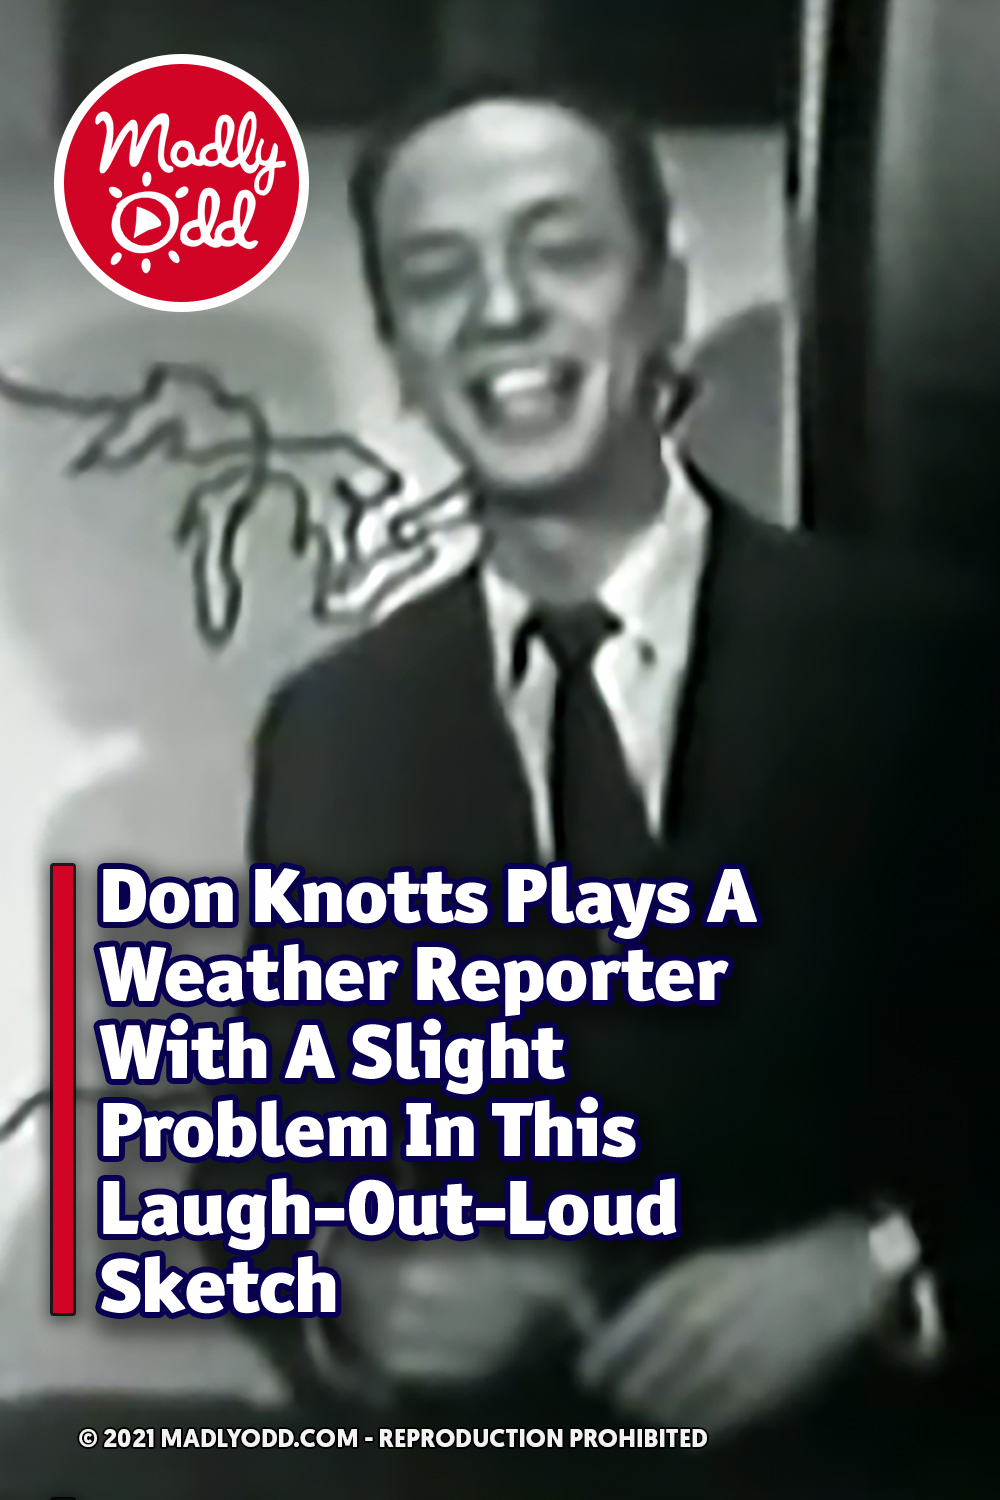 Don Knotts Plays A Weather Reporter With A Slight Problem In This Laugh-Out-Loud Sketch